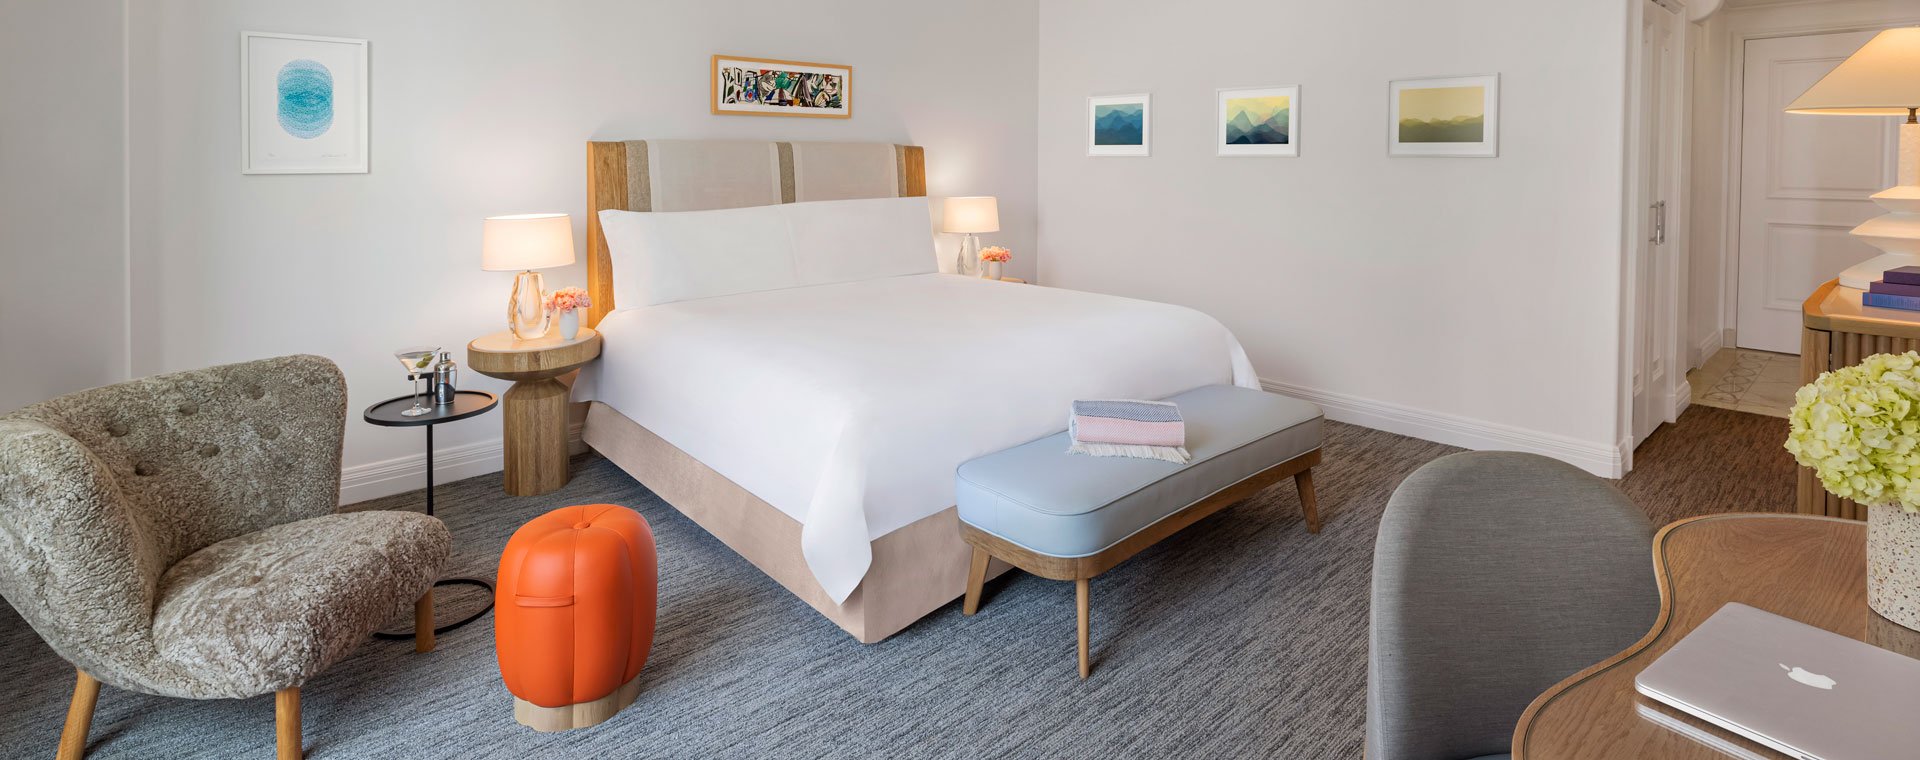 A king sized bed in a hotel room. There is an orange pumpkin shaped stool and a martini glass and shaker on a side table.